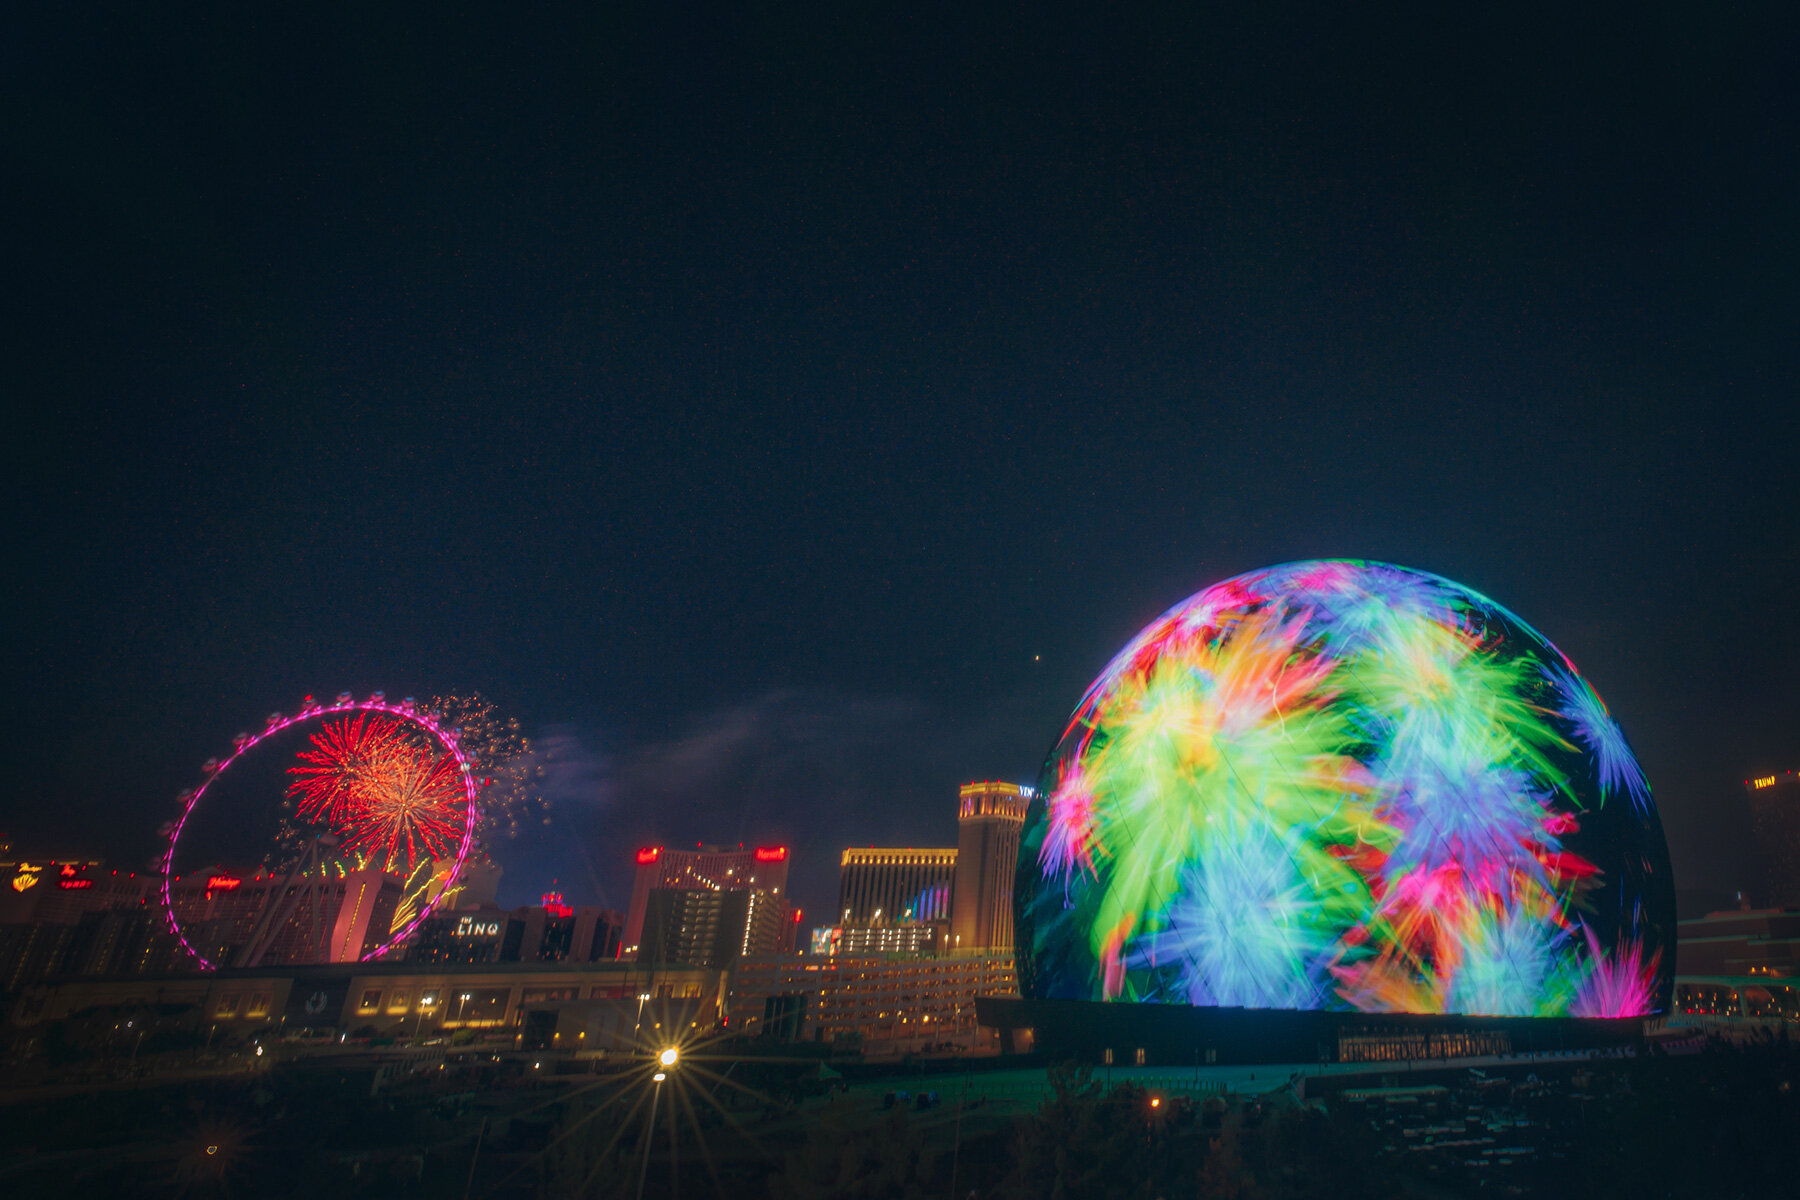 The Las Vegas Sphere: a new horizon in immersive experience design